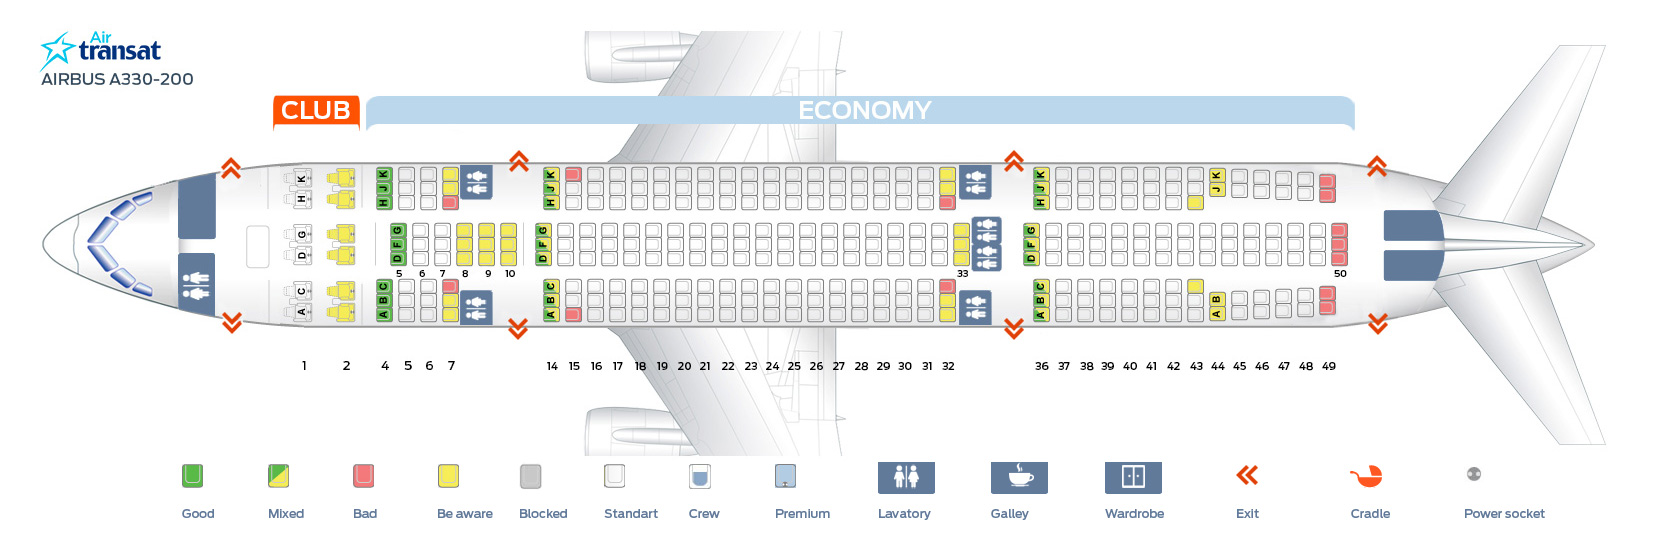 Seat map Airbus A330200 Air Transat. Best seats in the plane